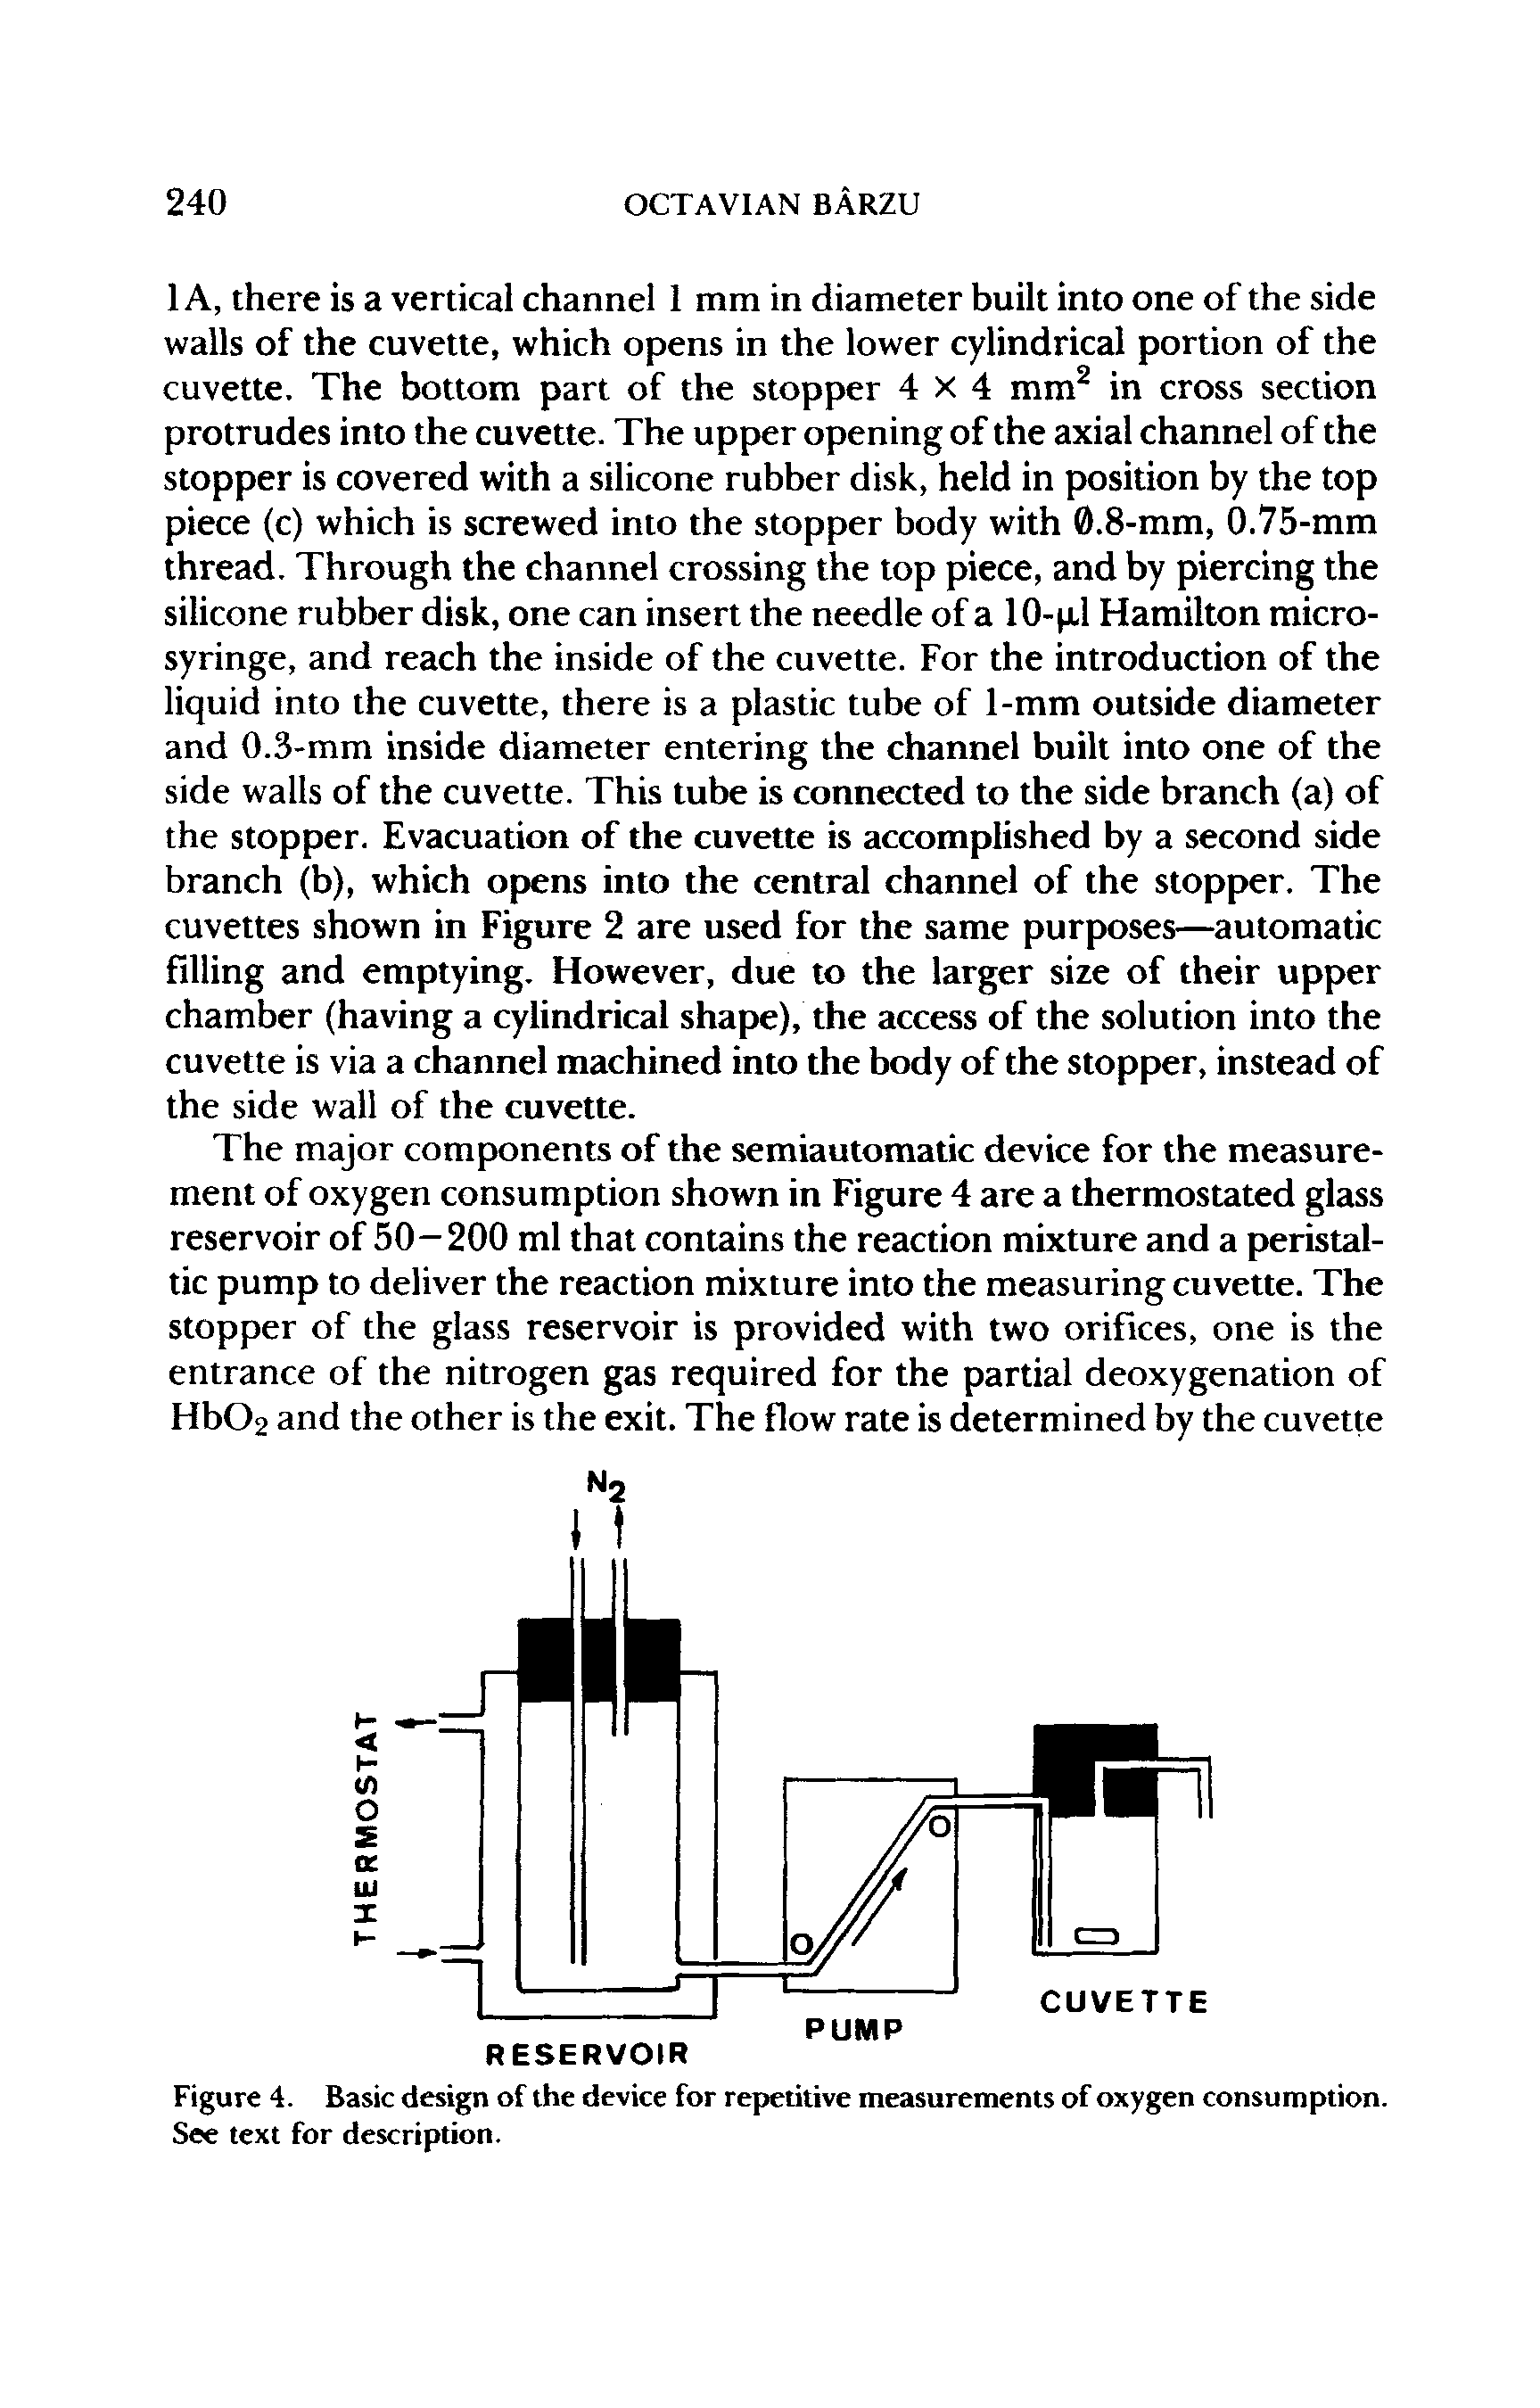 Figure 4. Basic design of the device for repetitive measurements of oxygen consumption. See text for description.